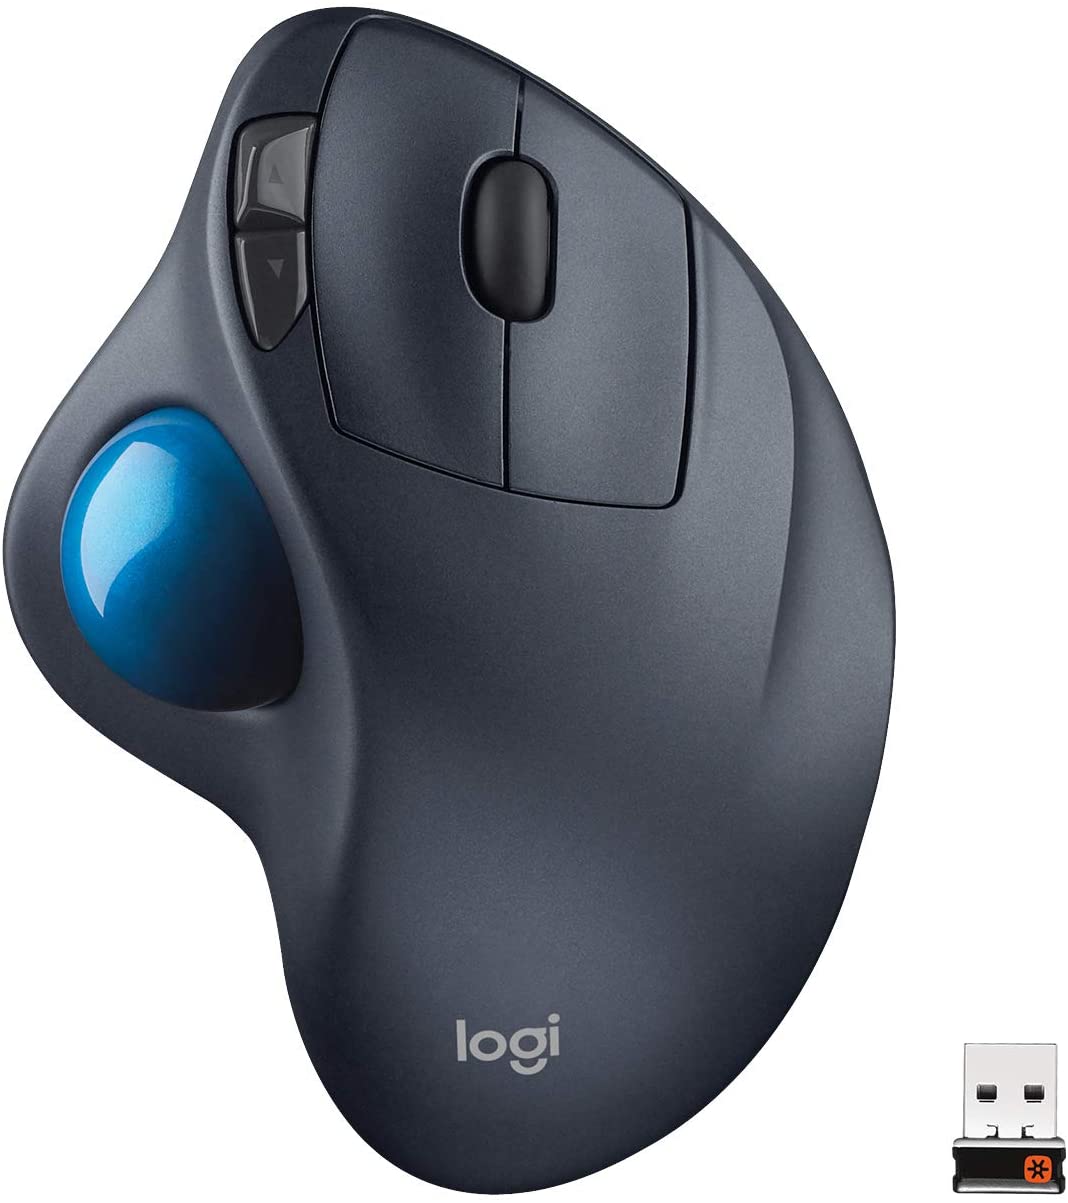 Logitech M570 Wireless Mouse Review-Better than a conventional mouse